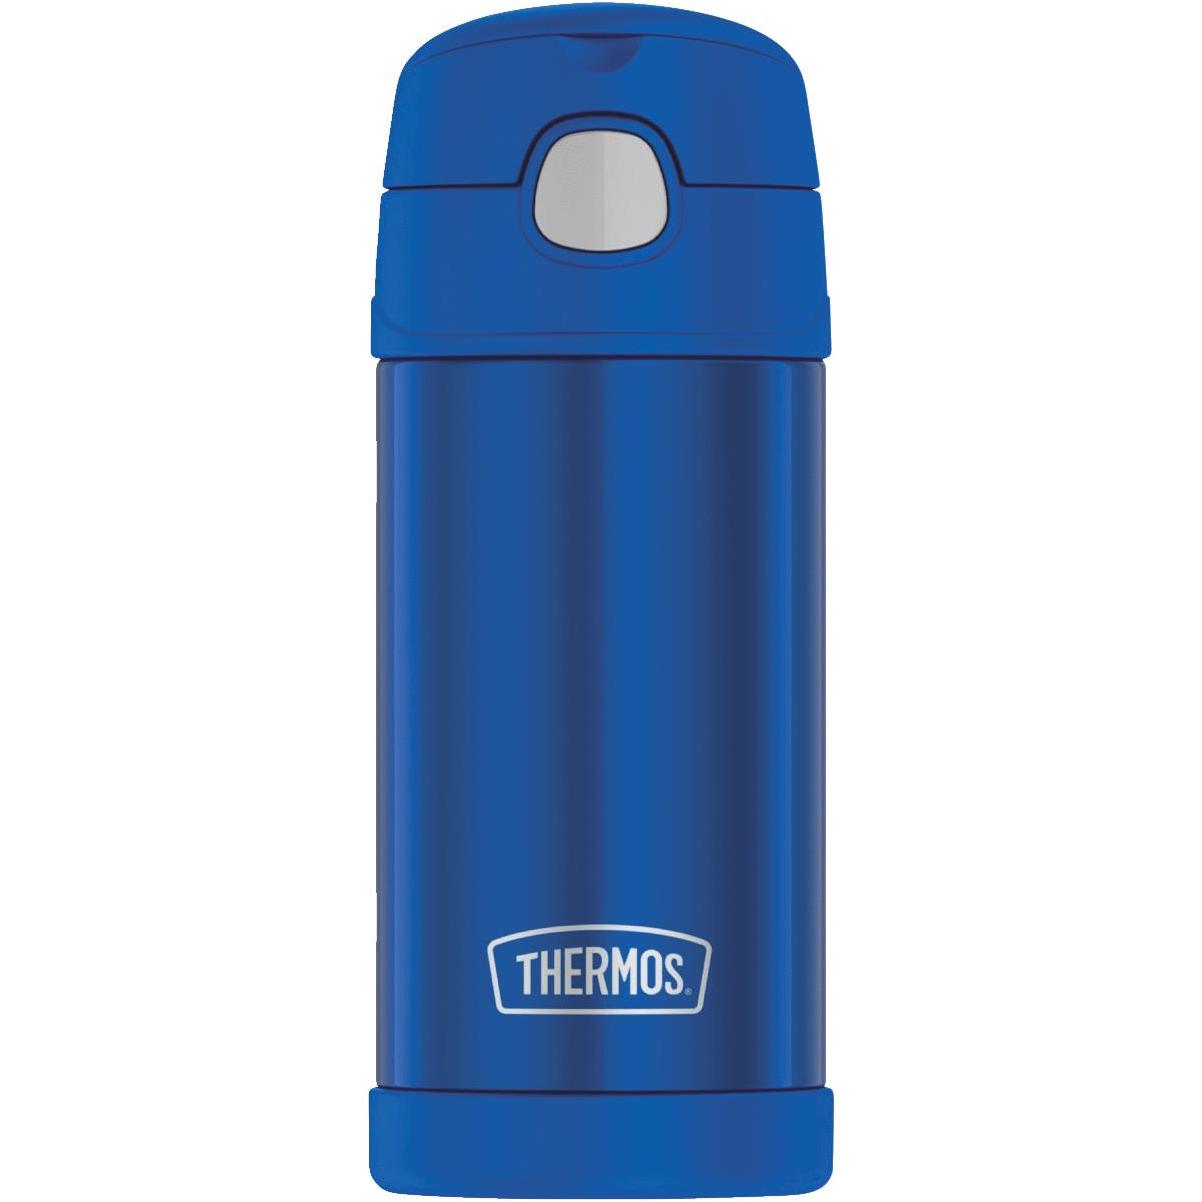 THERMOS FUNTAINER 12 Ounce Stainless Steel Vacuum Insulated Kids Straw  Bottle, Lime